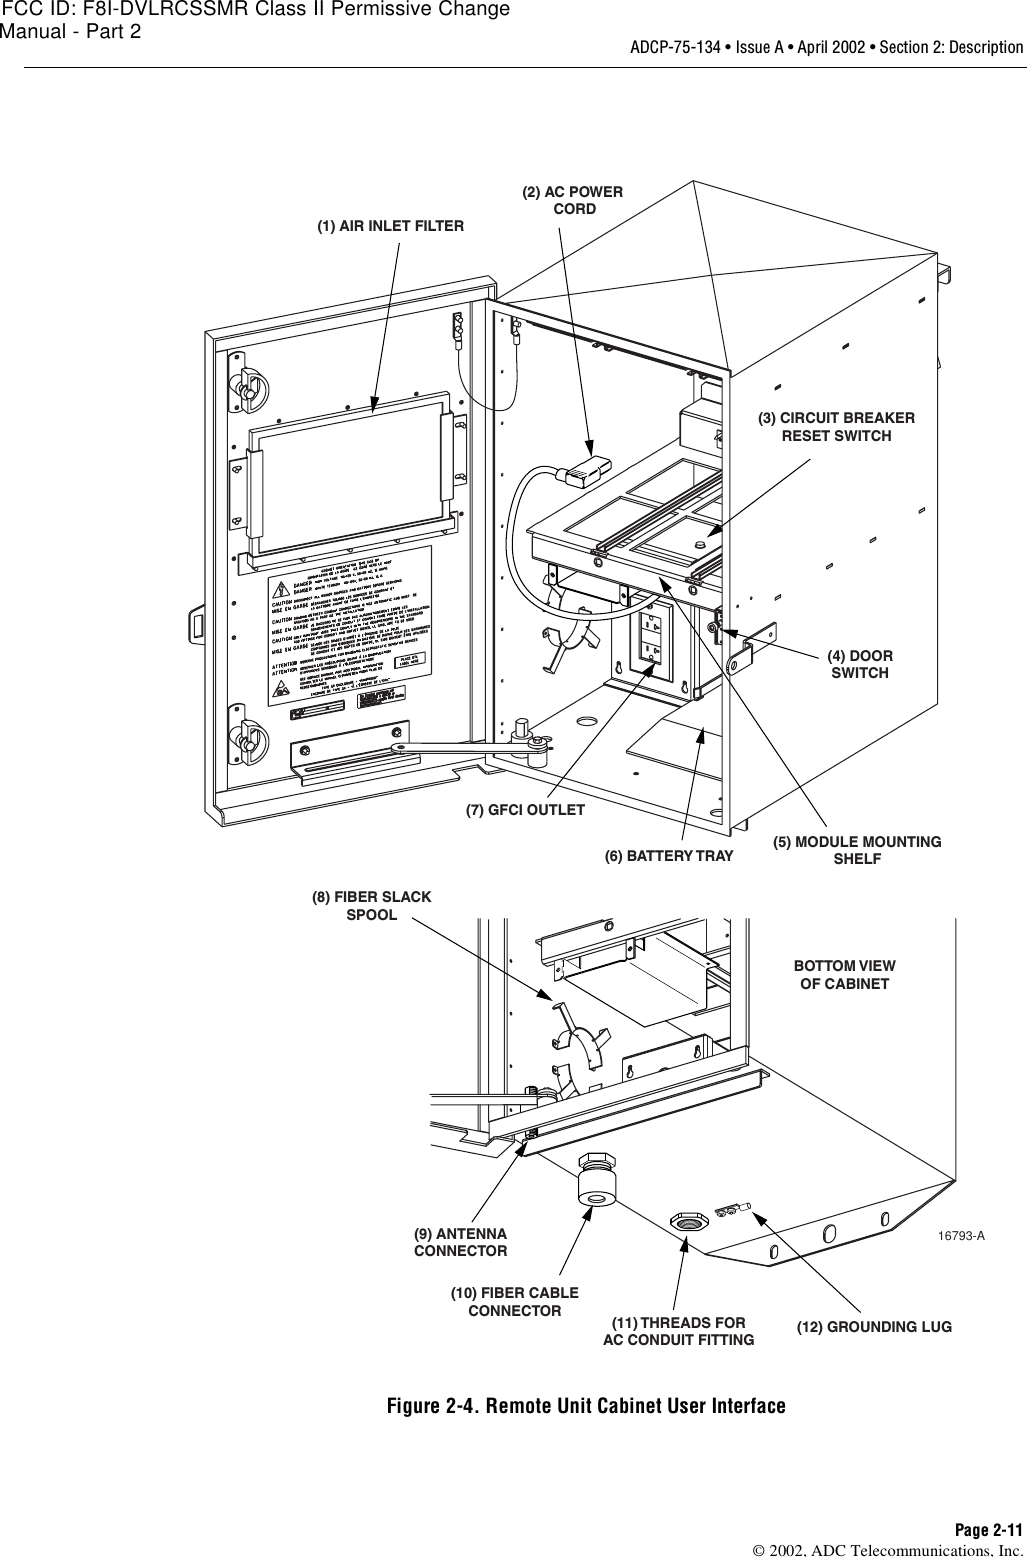 ADCP-75-134 • Issue A • April 2002 • Section 2: DescriptionPage 2-11©2002, ADC Telecommunications, Inc.Figure 2-4. Remote Unit Cabinet User InterfaceBOTTOM VIEWOF CABINET(7) GFCI OUTLET(4) DOORSWITCH(1) AIR INLET FILTER(2) AC POWER CORD(3) CIRCUIT BREAKERRESET SWITCH(5) MODULE MOUNTINGSHELF(6) BATTERY TRAY(8) FIBER SLACKSPOOL(9) ANTENNACONNECTOR(10) FIBER CABLECONNECTOR (11) THREADS FORAC CONDUIT FITTING (12) GROUNDING LUG16793-AFCC ID: F8I-DVLRCSSMR Class II Permissive ChangeManual - Part 2